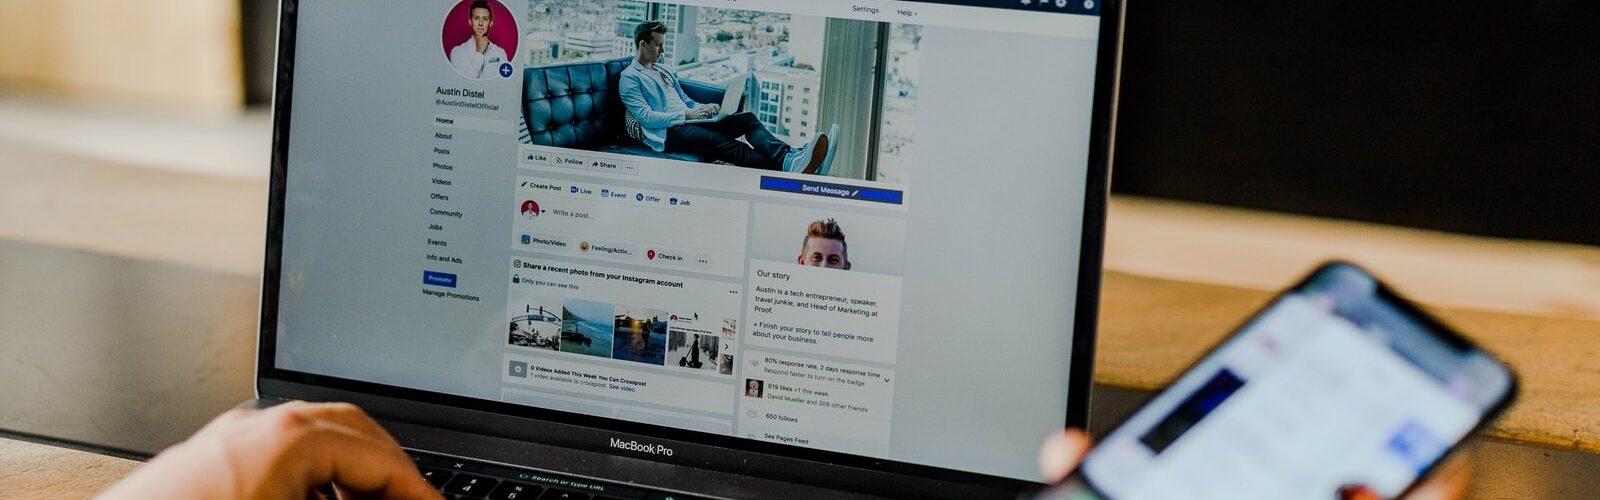 How to Make Your Facebook Page More Visible